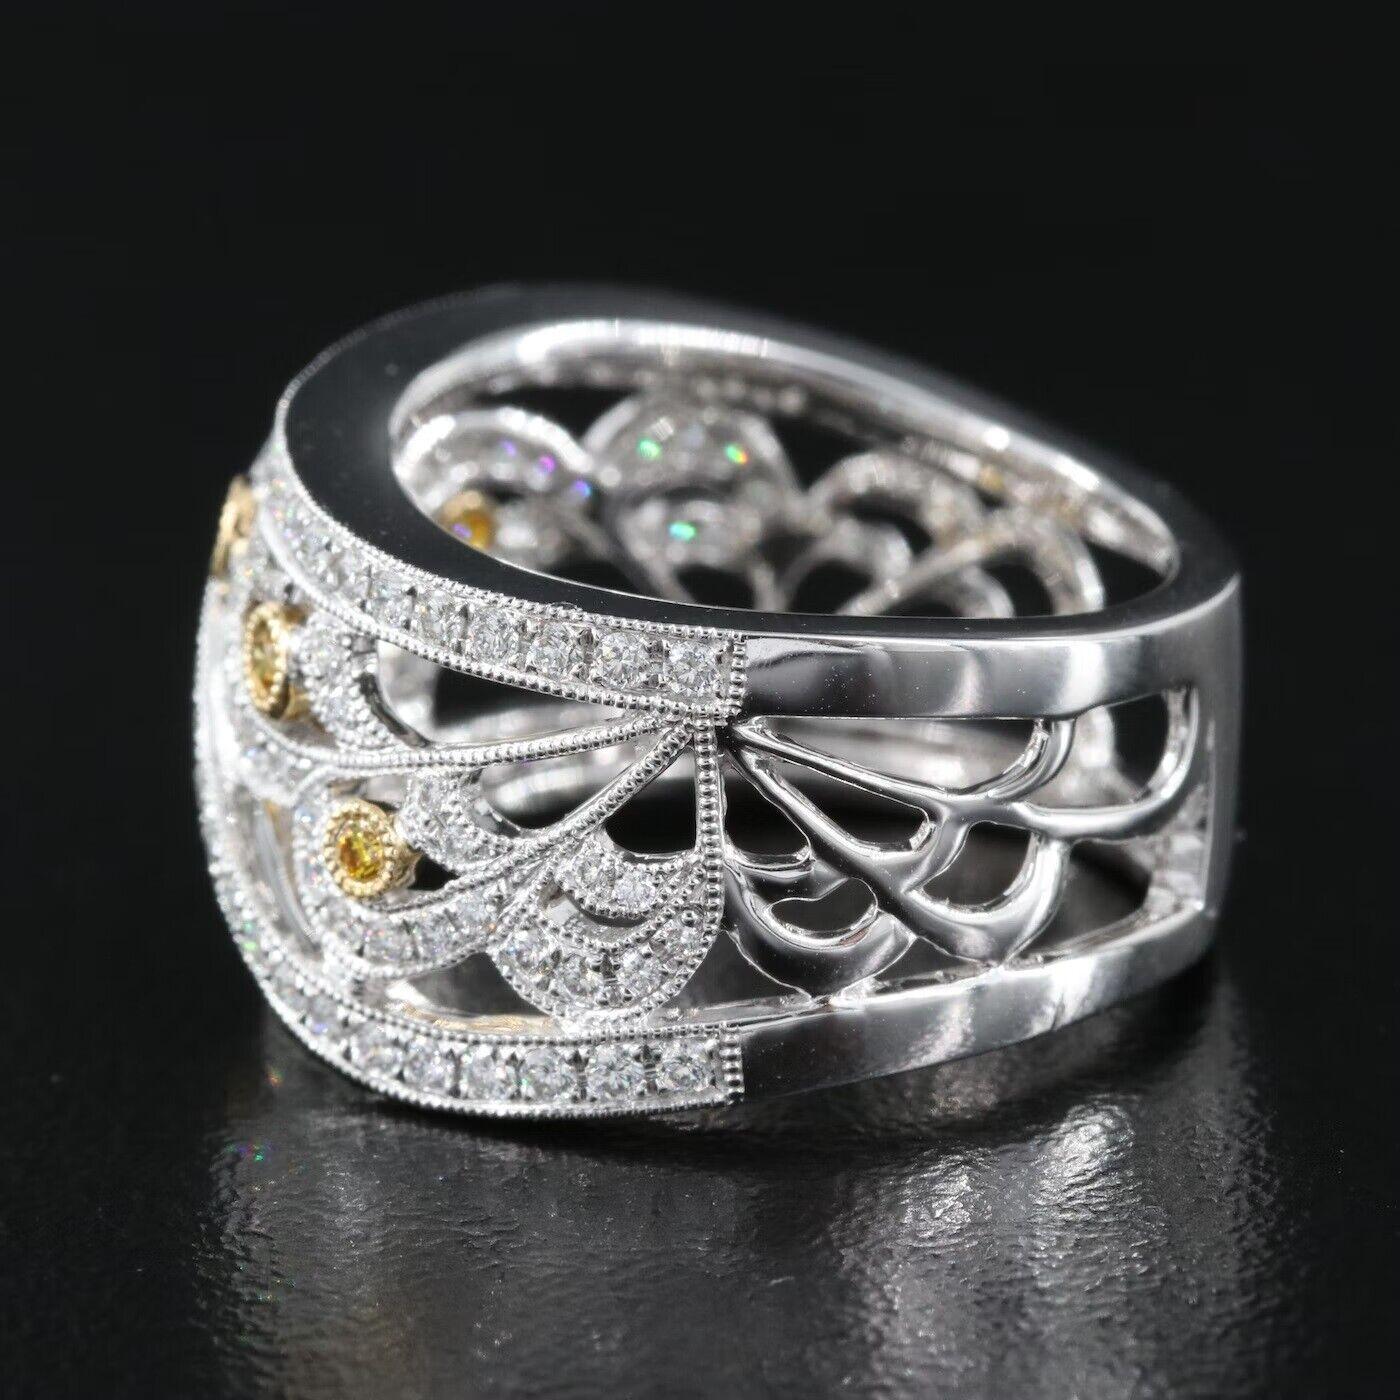 $9500 / New / Jye’s Designer 1.03 Ct Diamond Ring / 18K White Gold / Super Fancy In New Condition For Sale In Rancho Mirage, CA